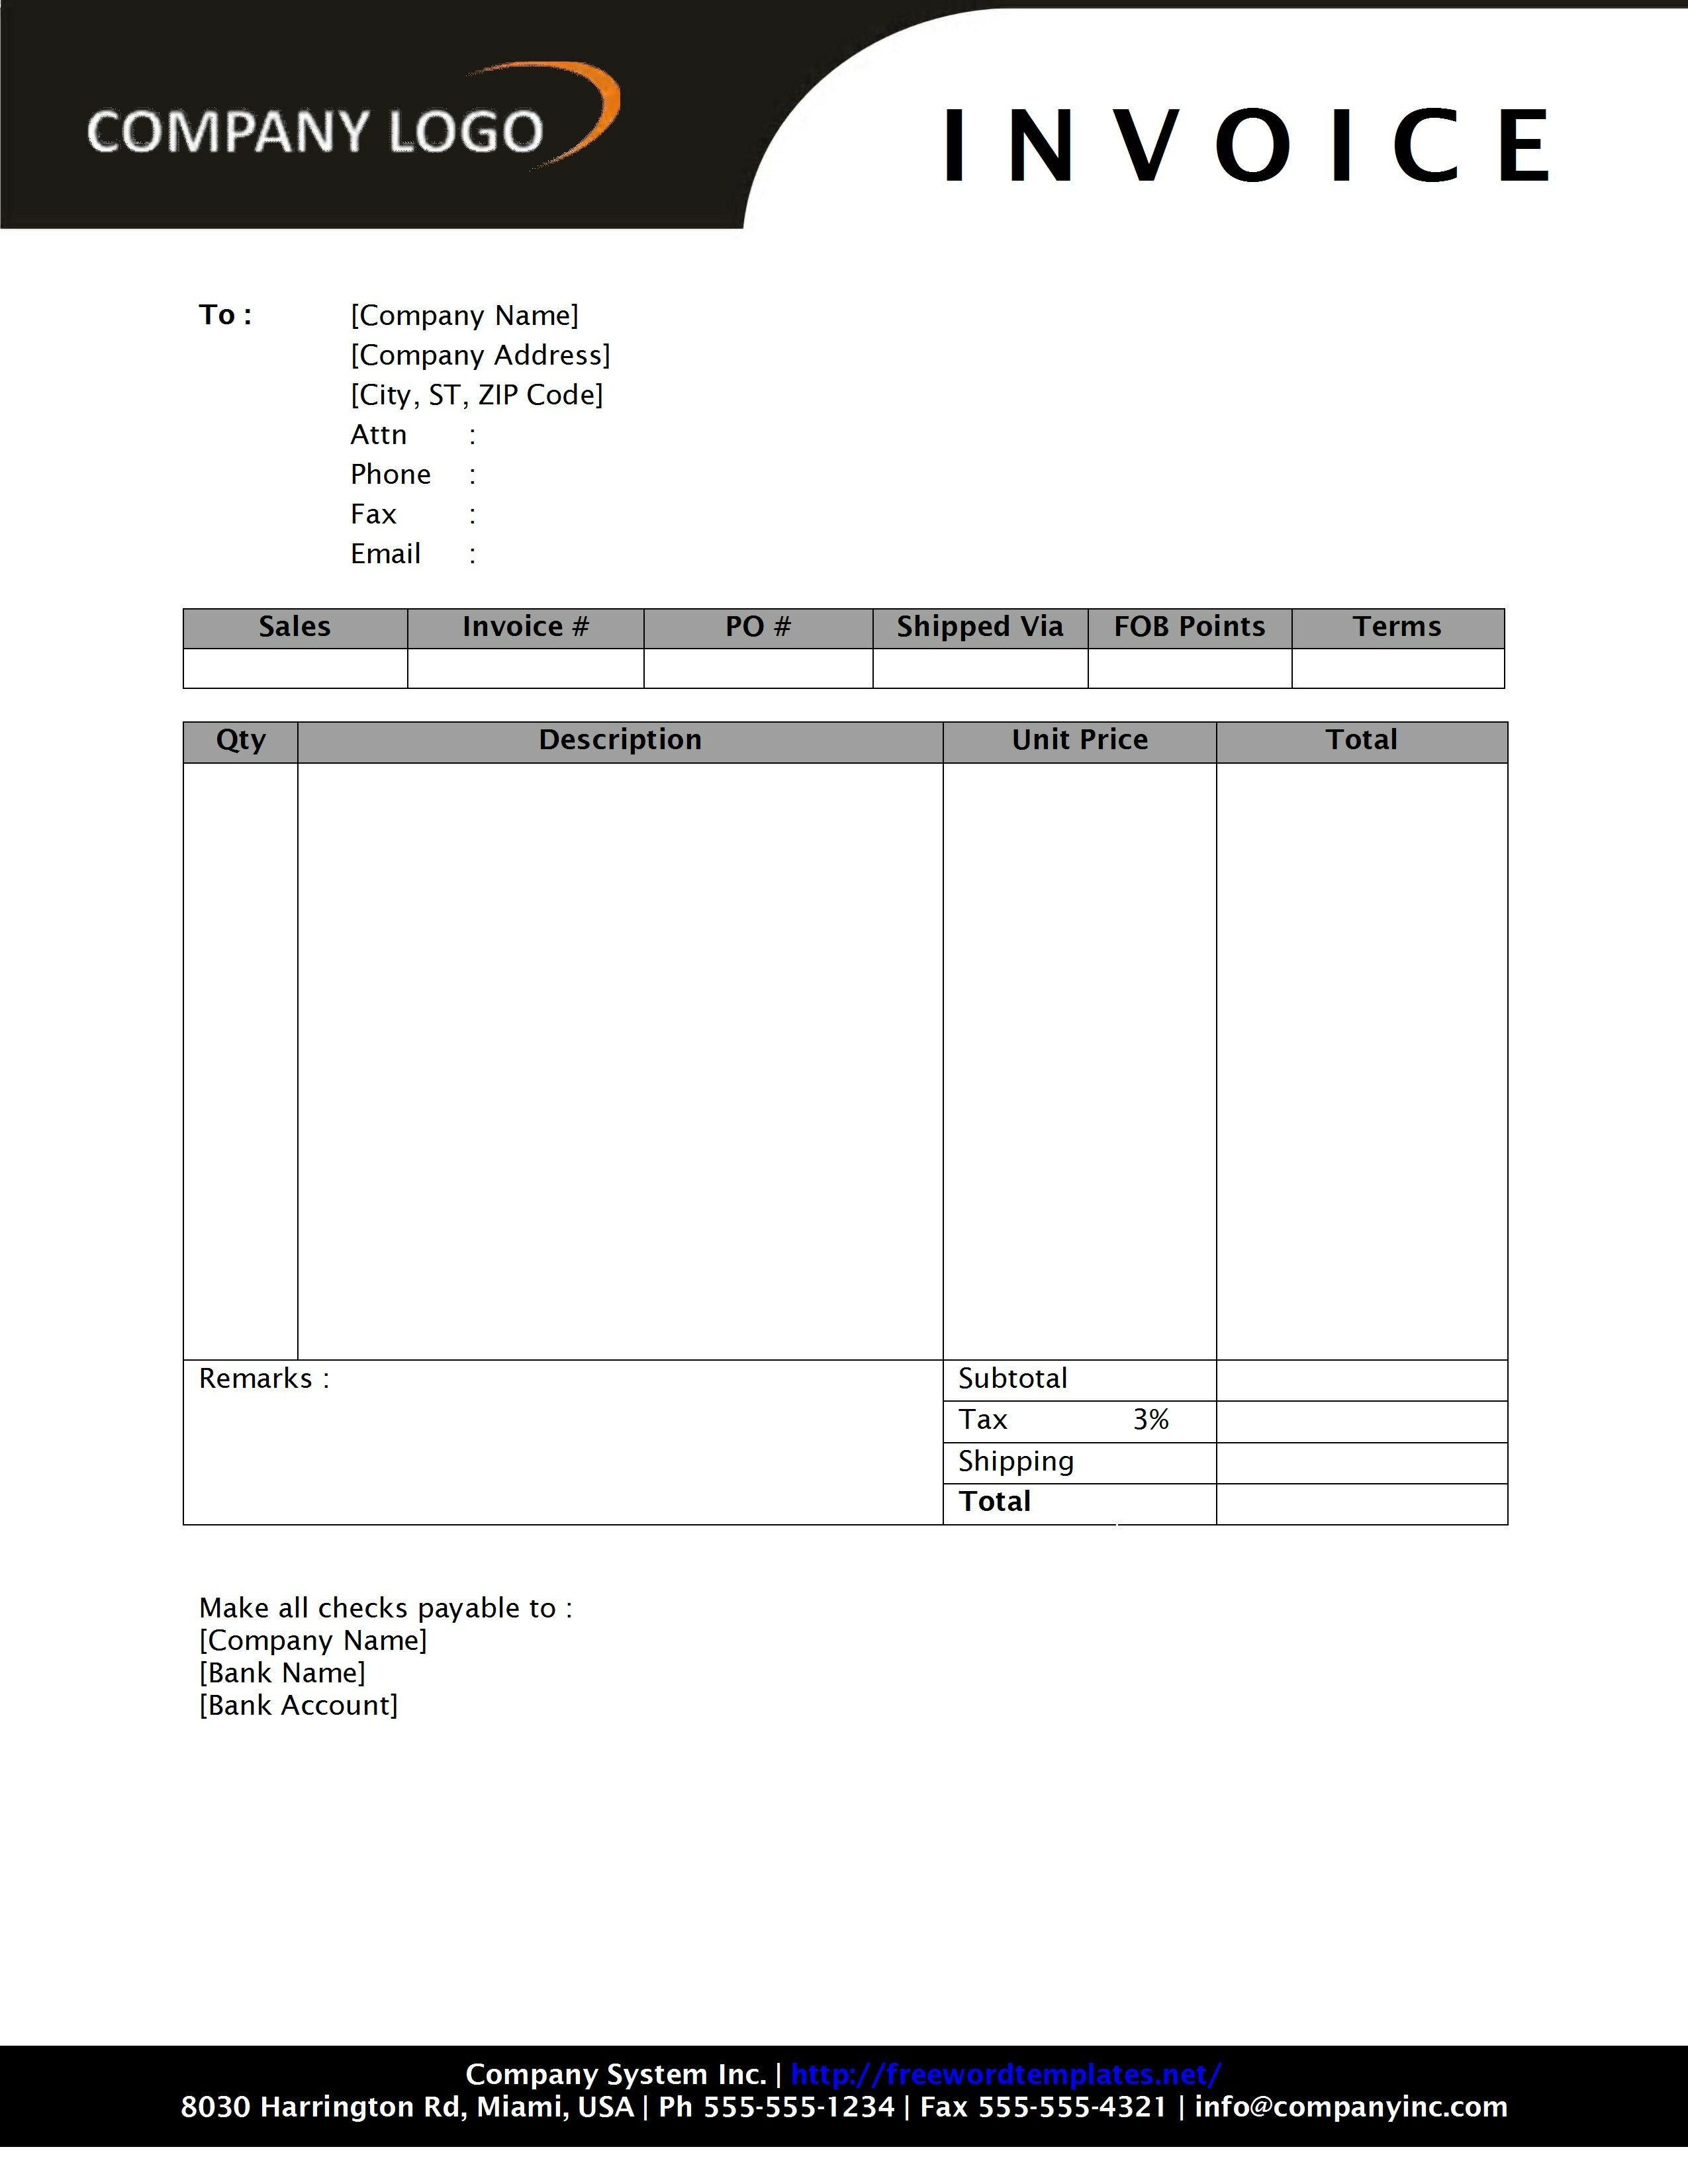 free invoice template microsoft word sales invoice template sales invoice template free